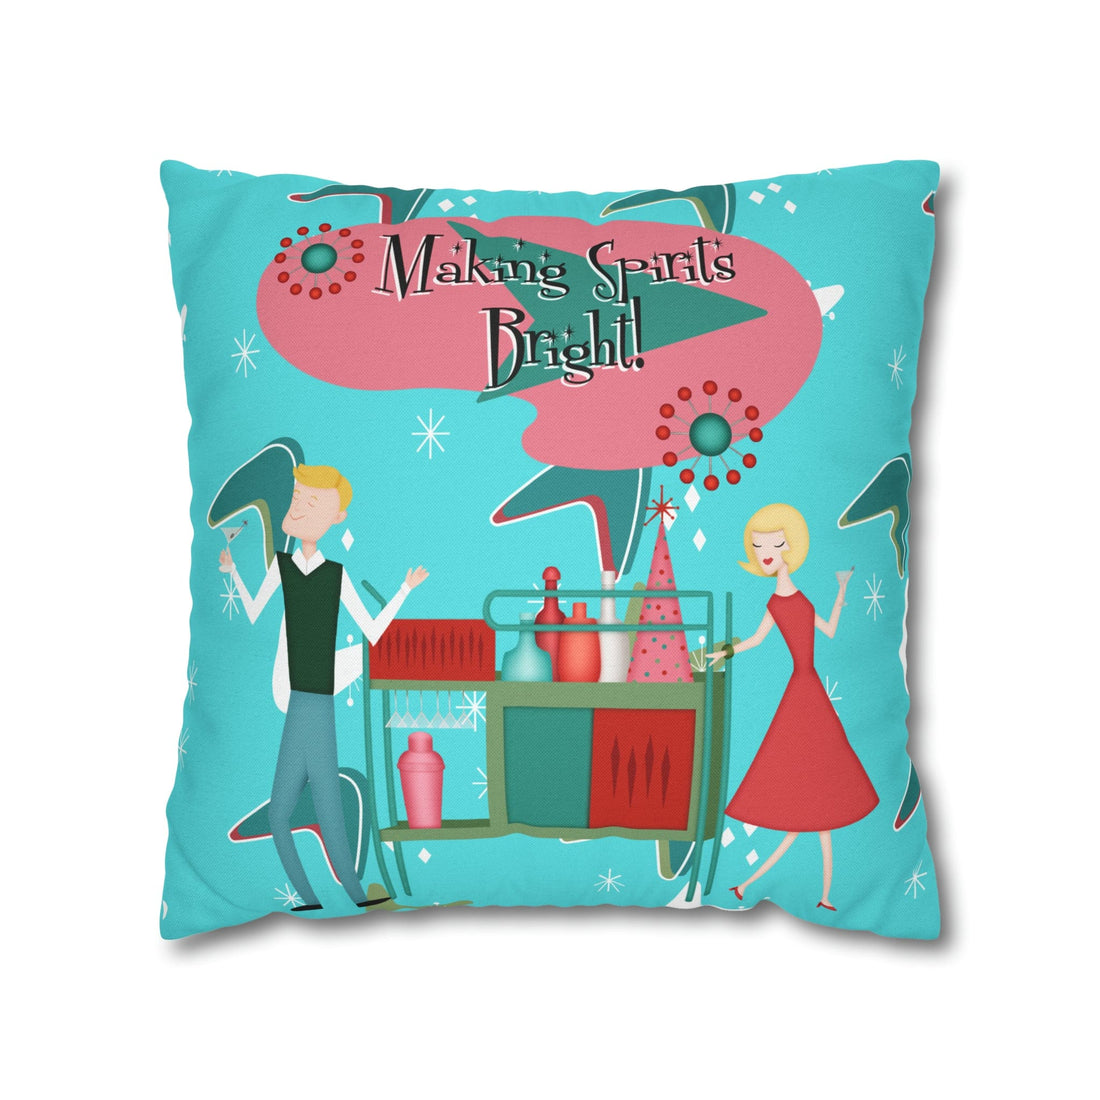 Mid Century Modern Christmas, Making the Spirits Brighter, Atomic Cocktail Kitschy Holiday Christmas Pillow Case Home Decor